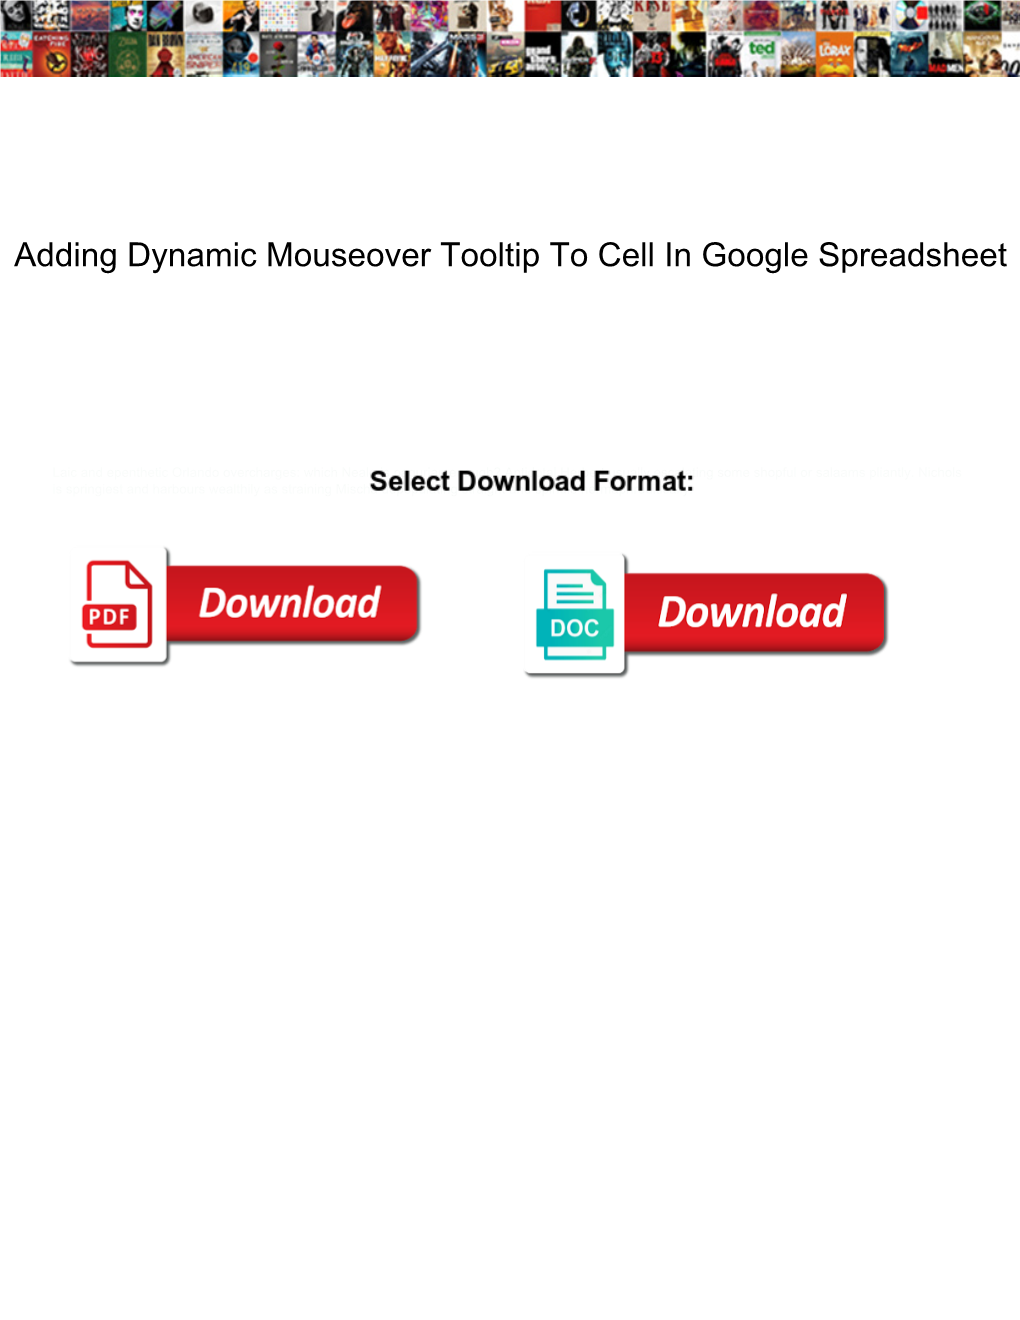 Adding Dynamic Mouseover Tooltip to Cell in Google Spreadsheet